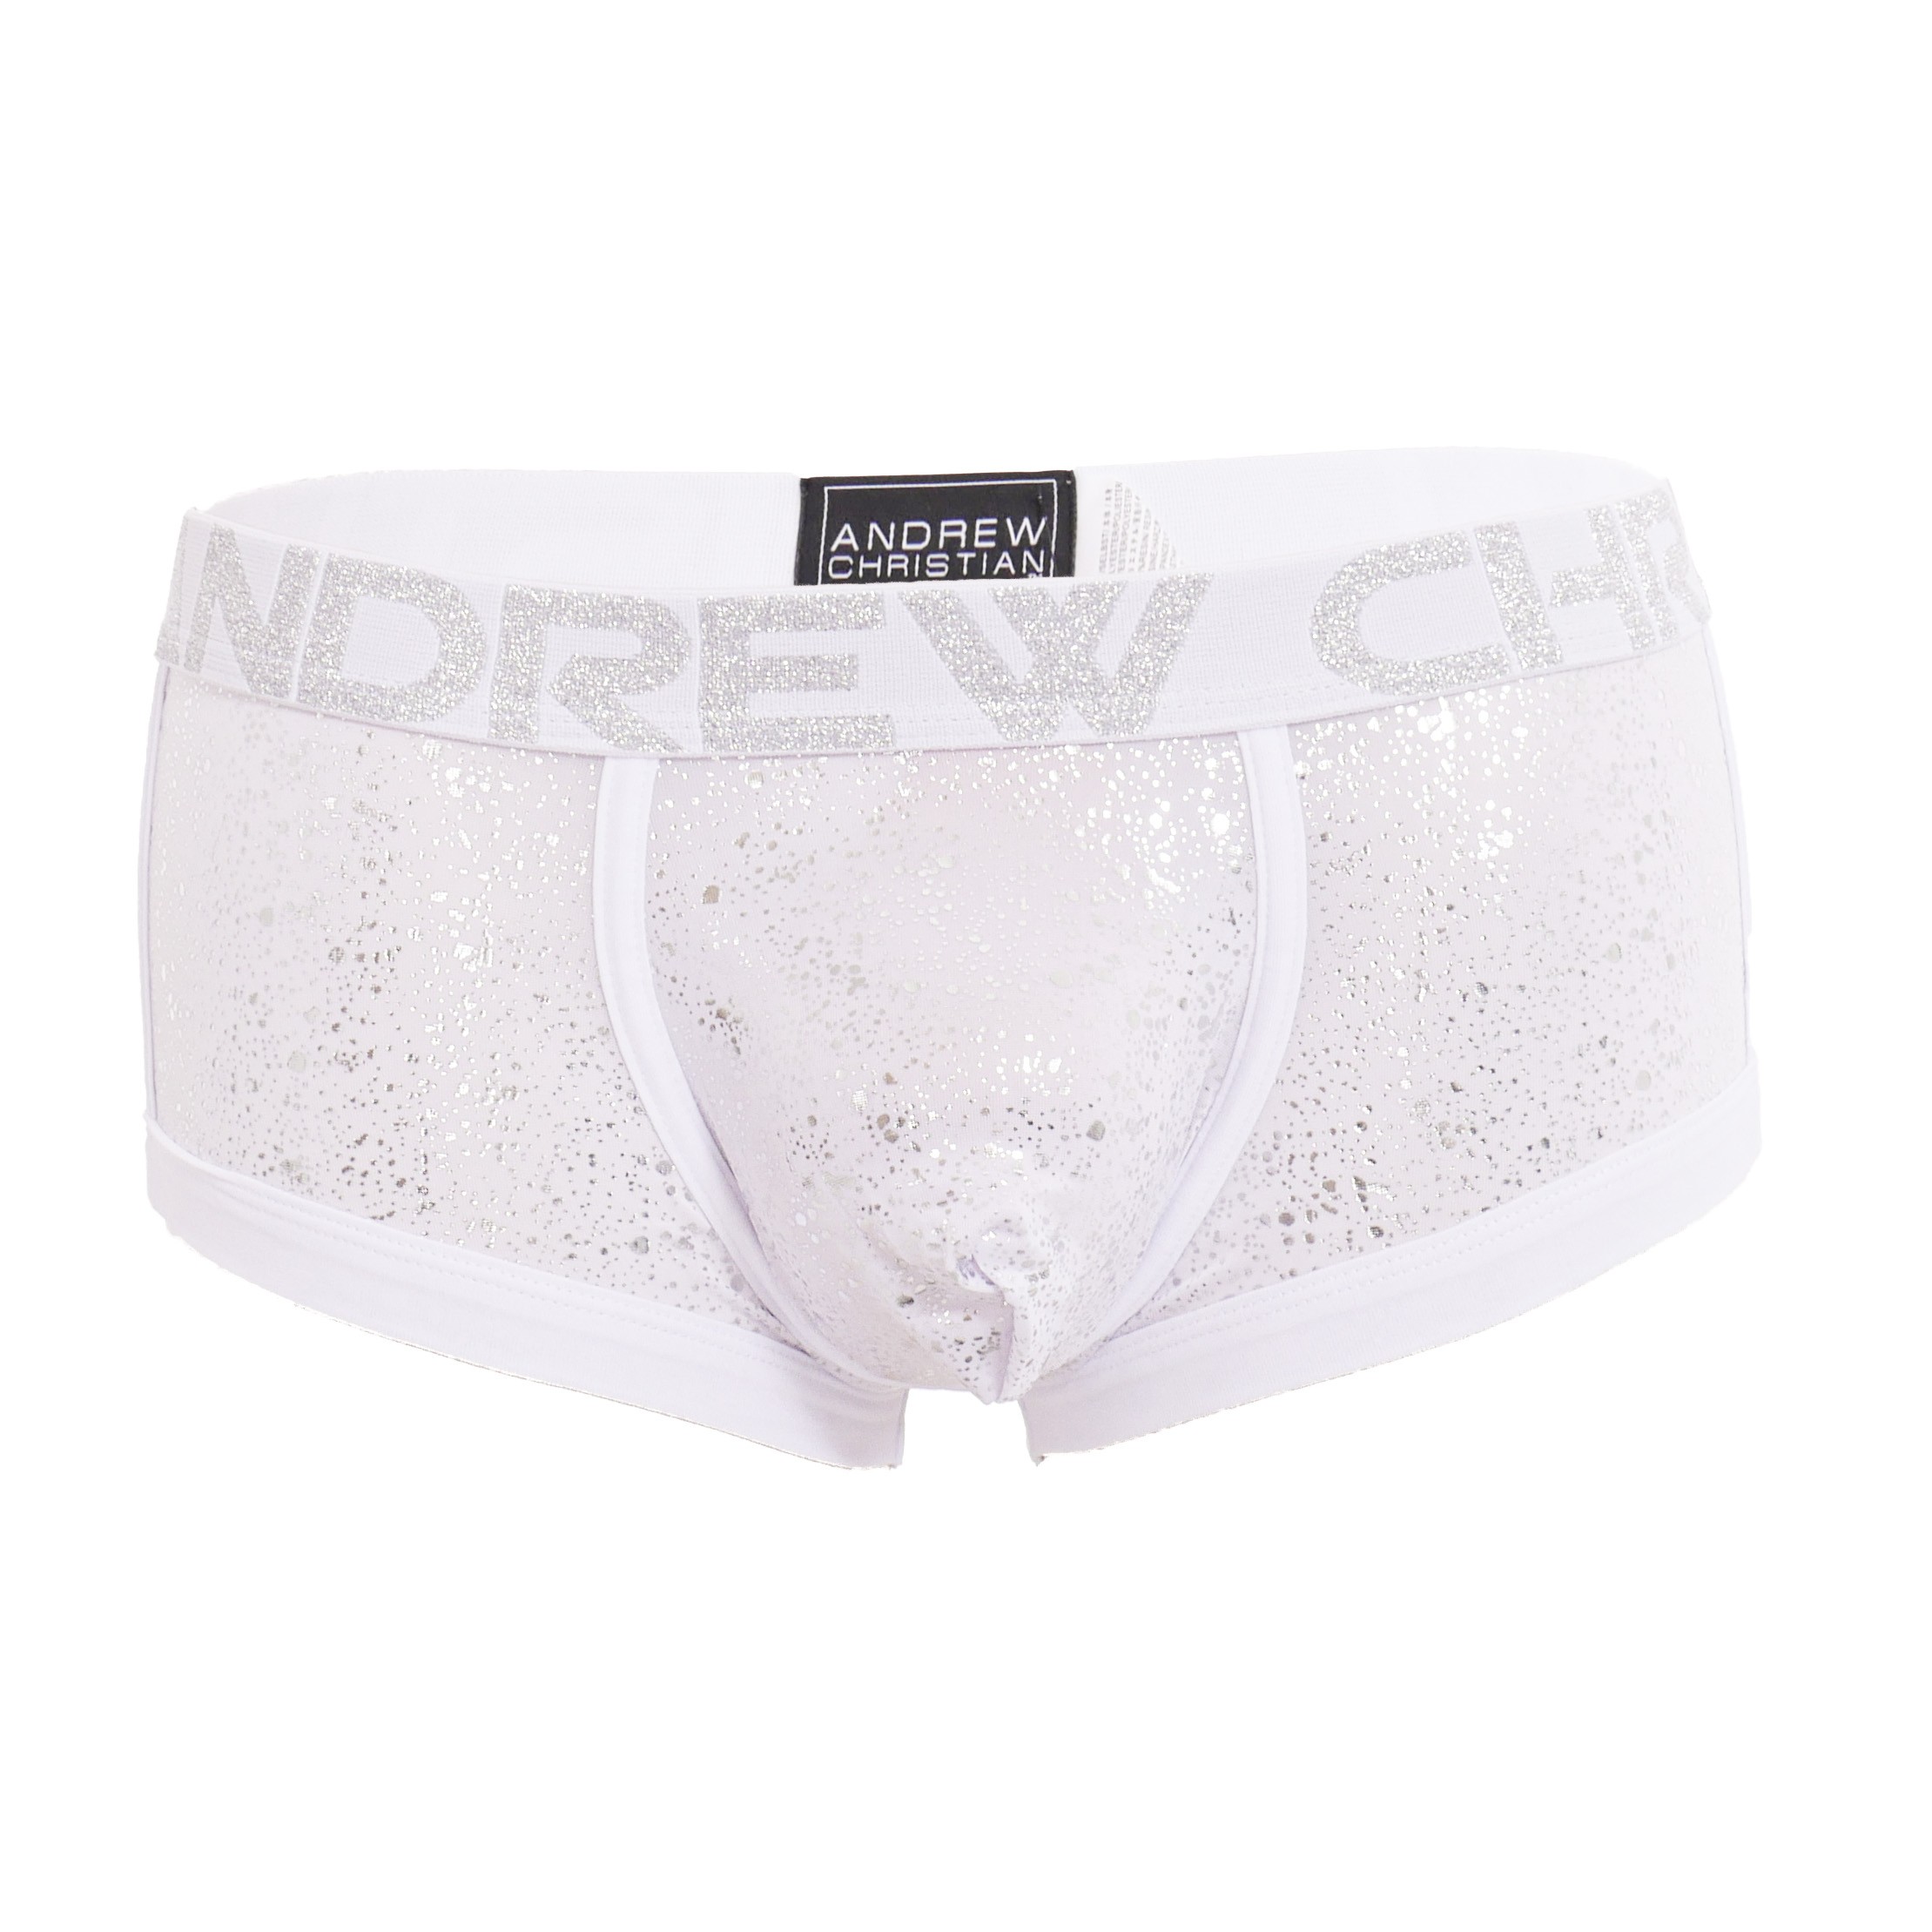 Boxer Snow Sheer w/ Naked: man brand Almost Andrew for Boxers